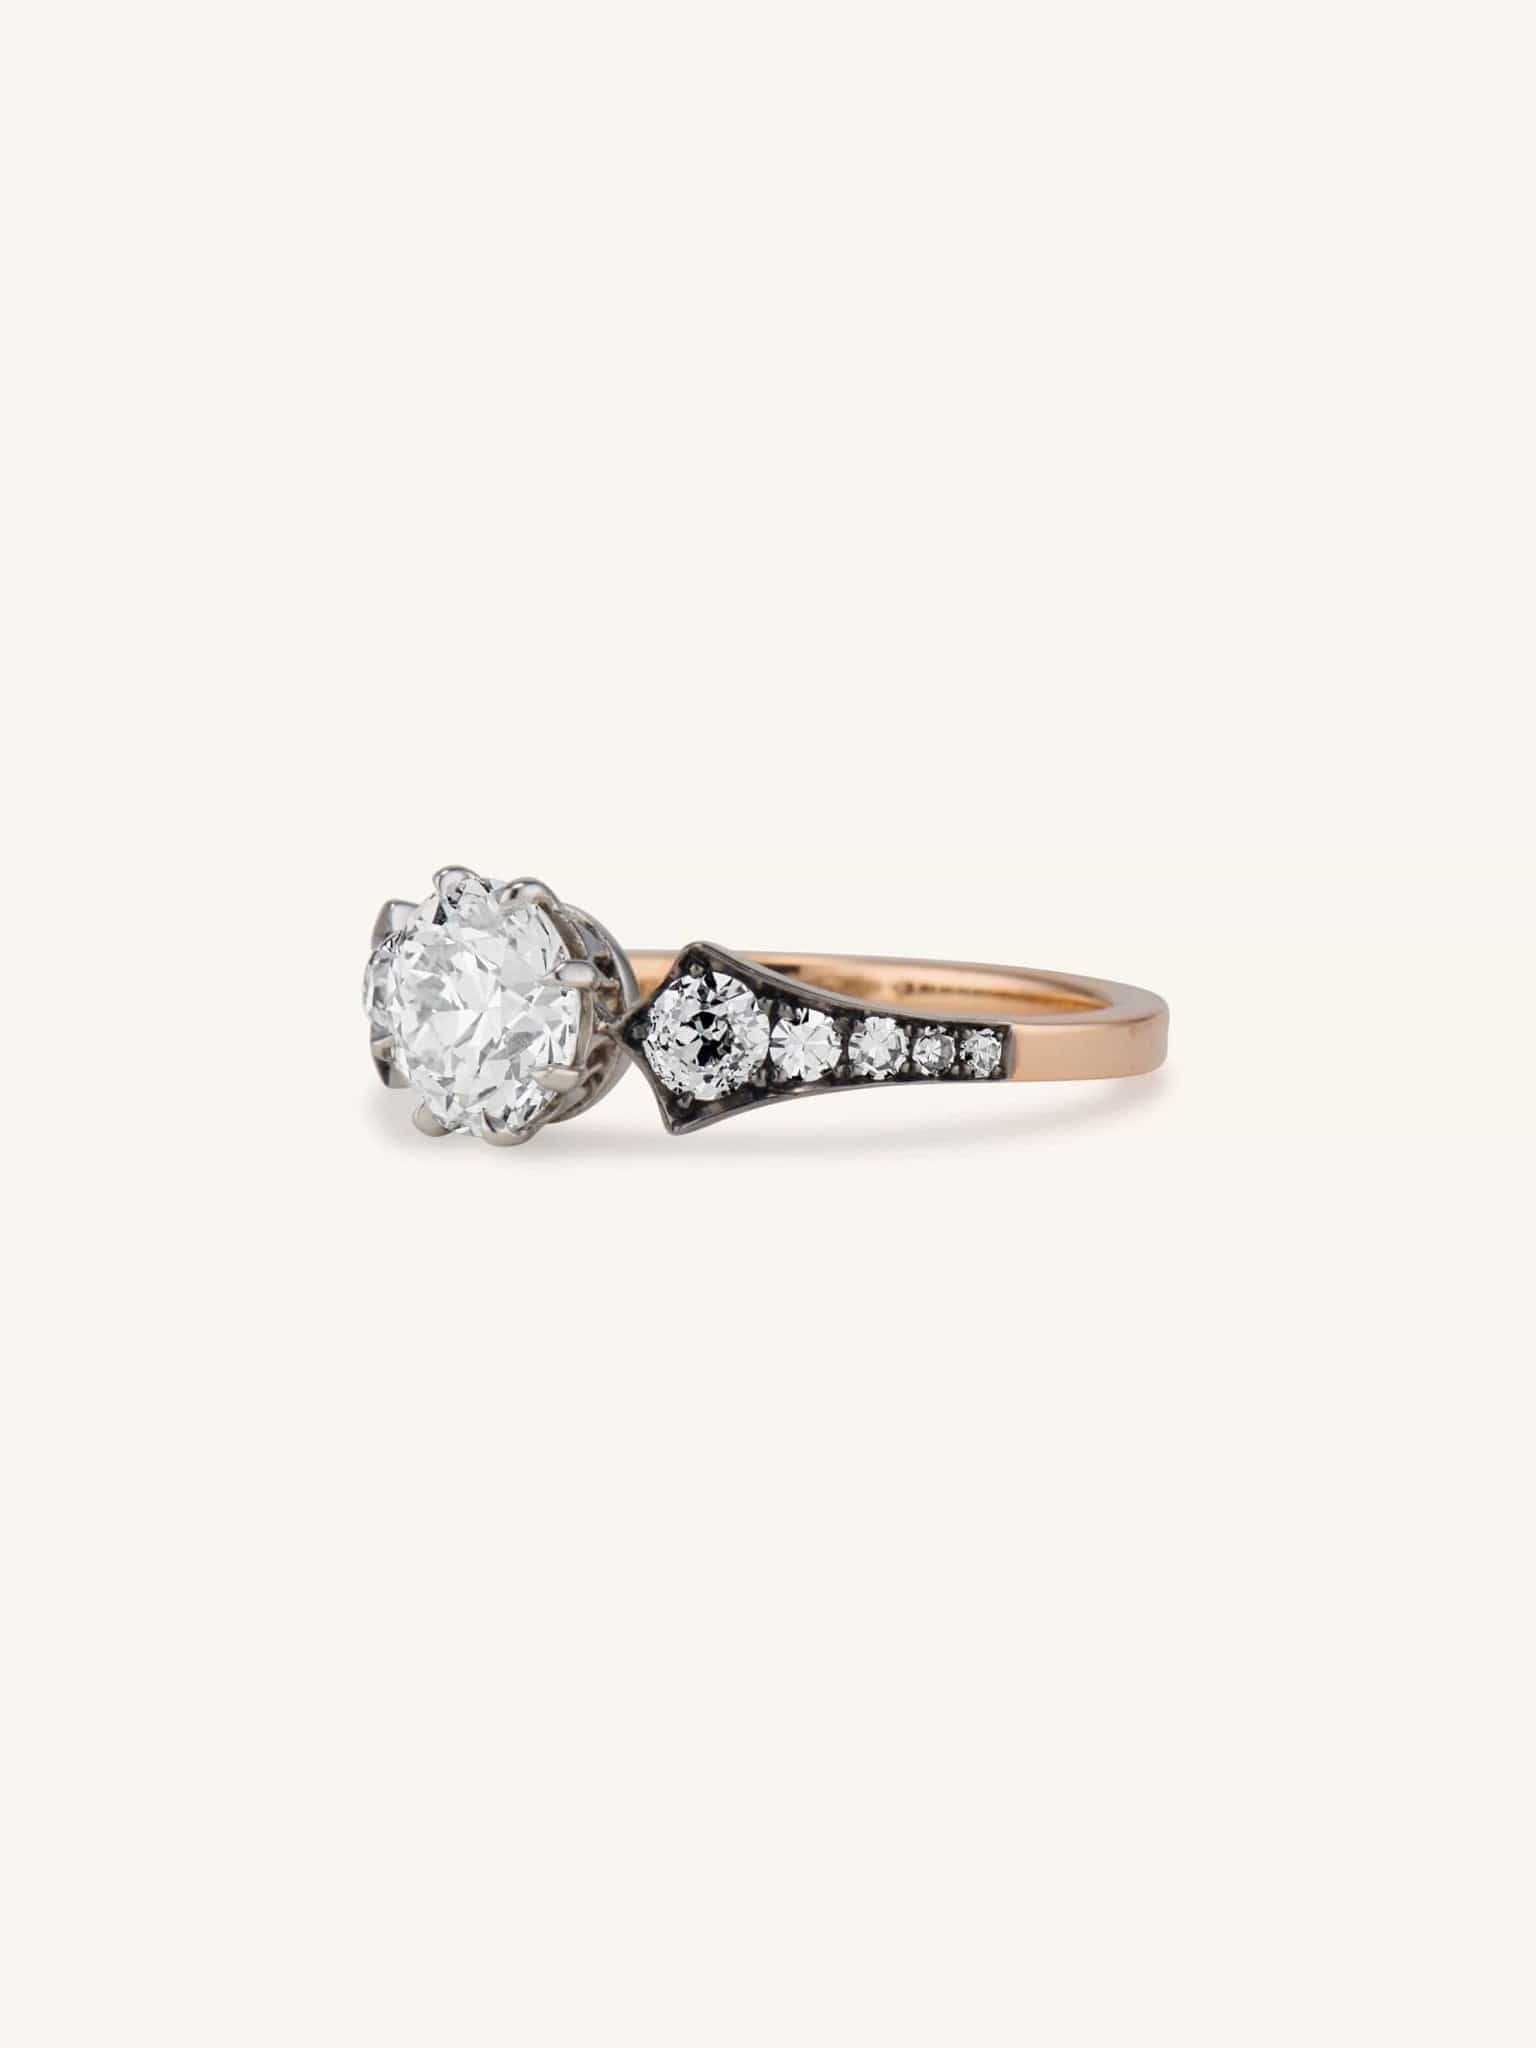 Engagement Rings Archives - House Of Diamonds